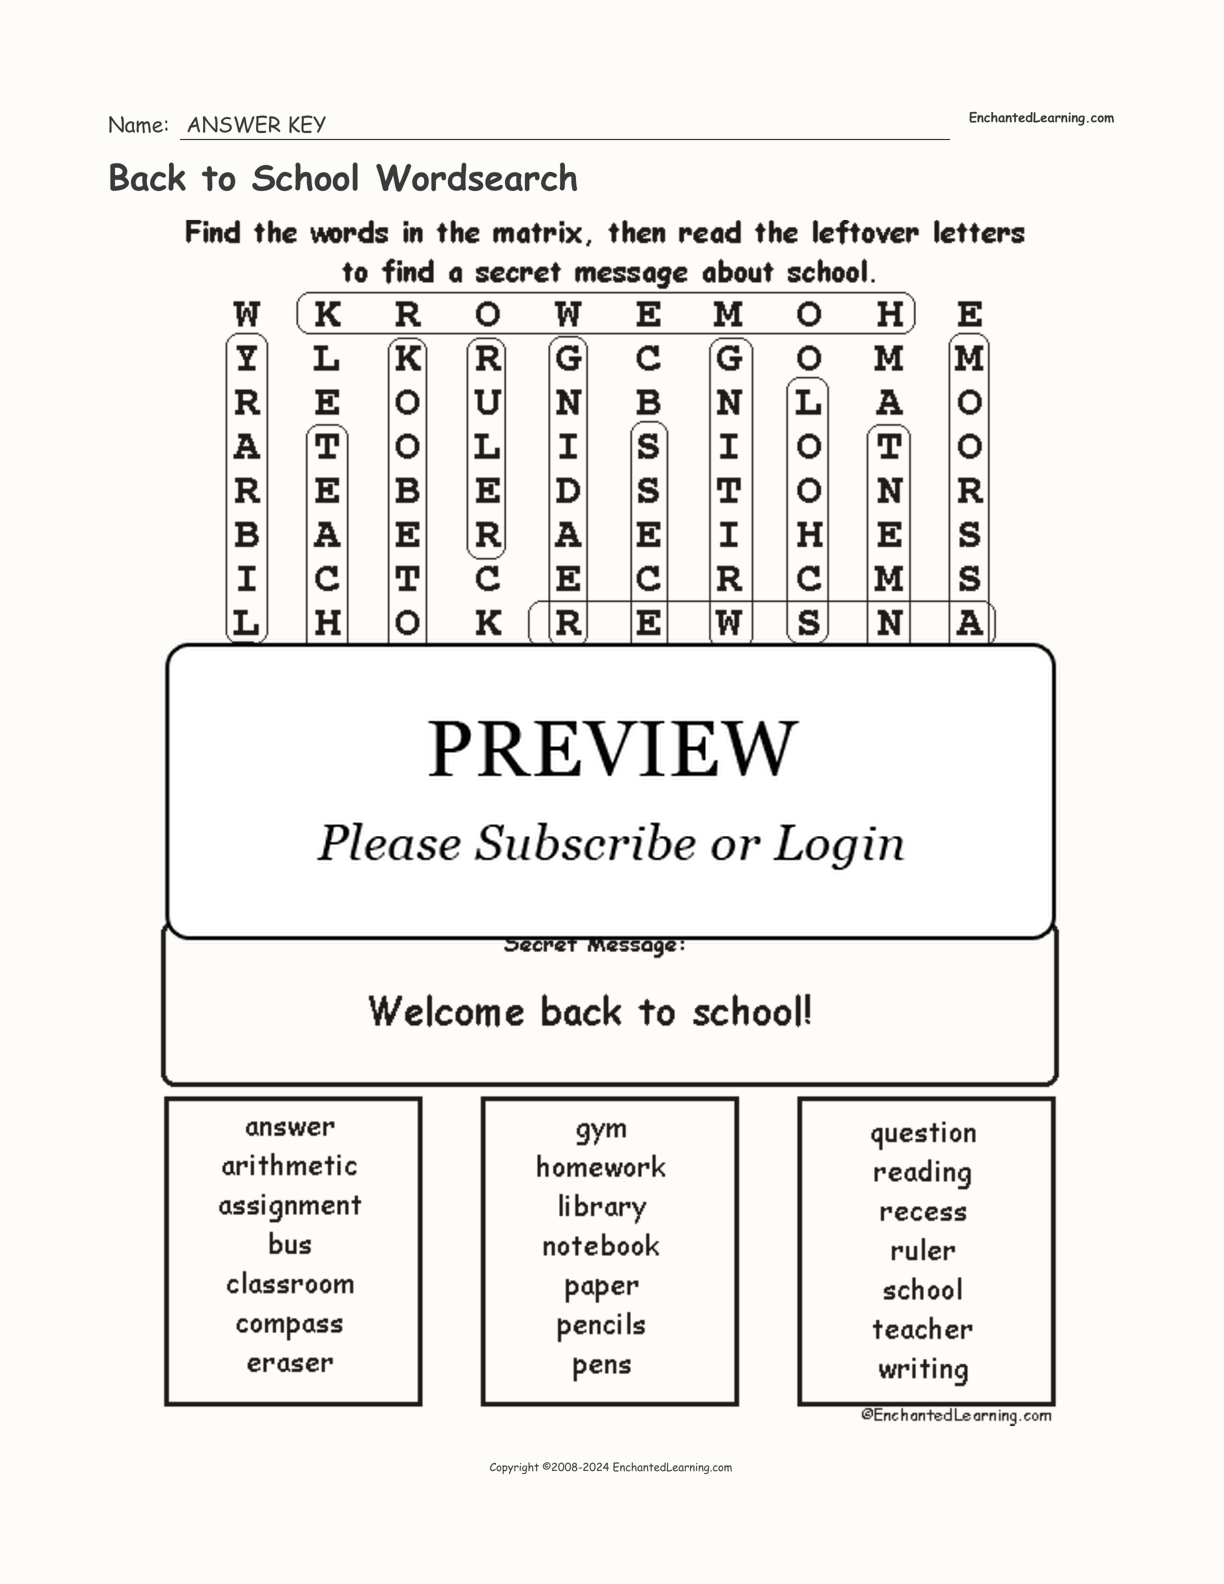 Back to School Wordsearch interactive worksheet page 2